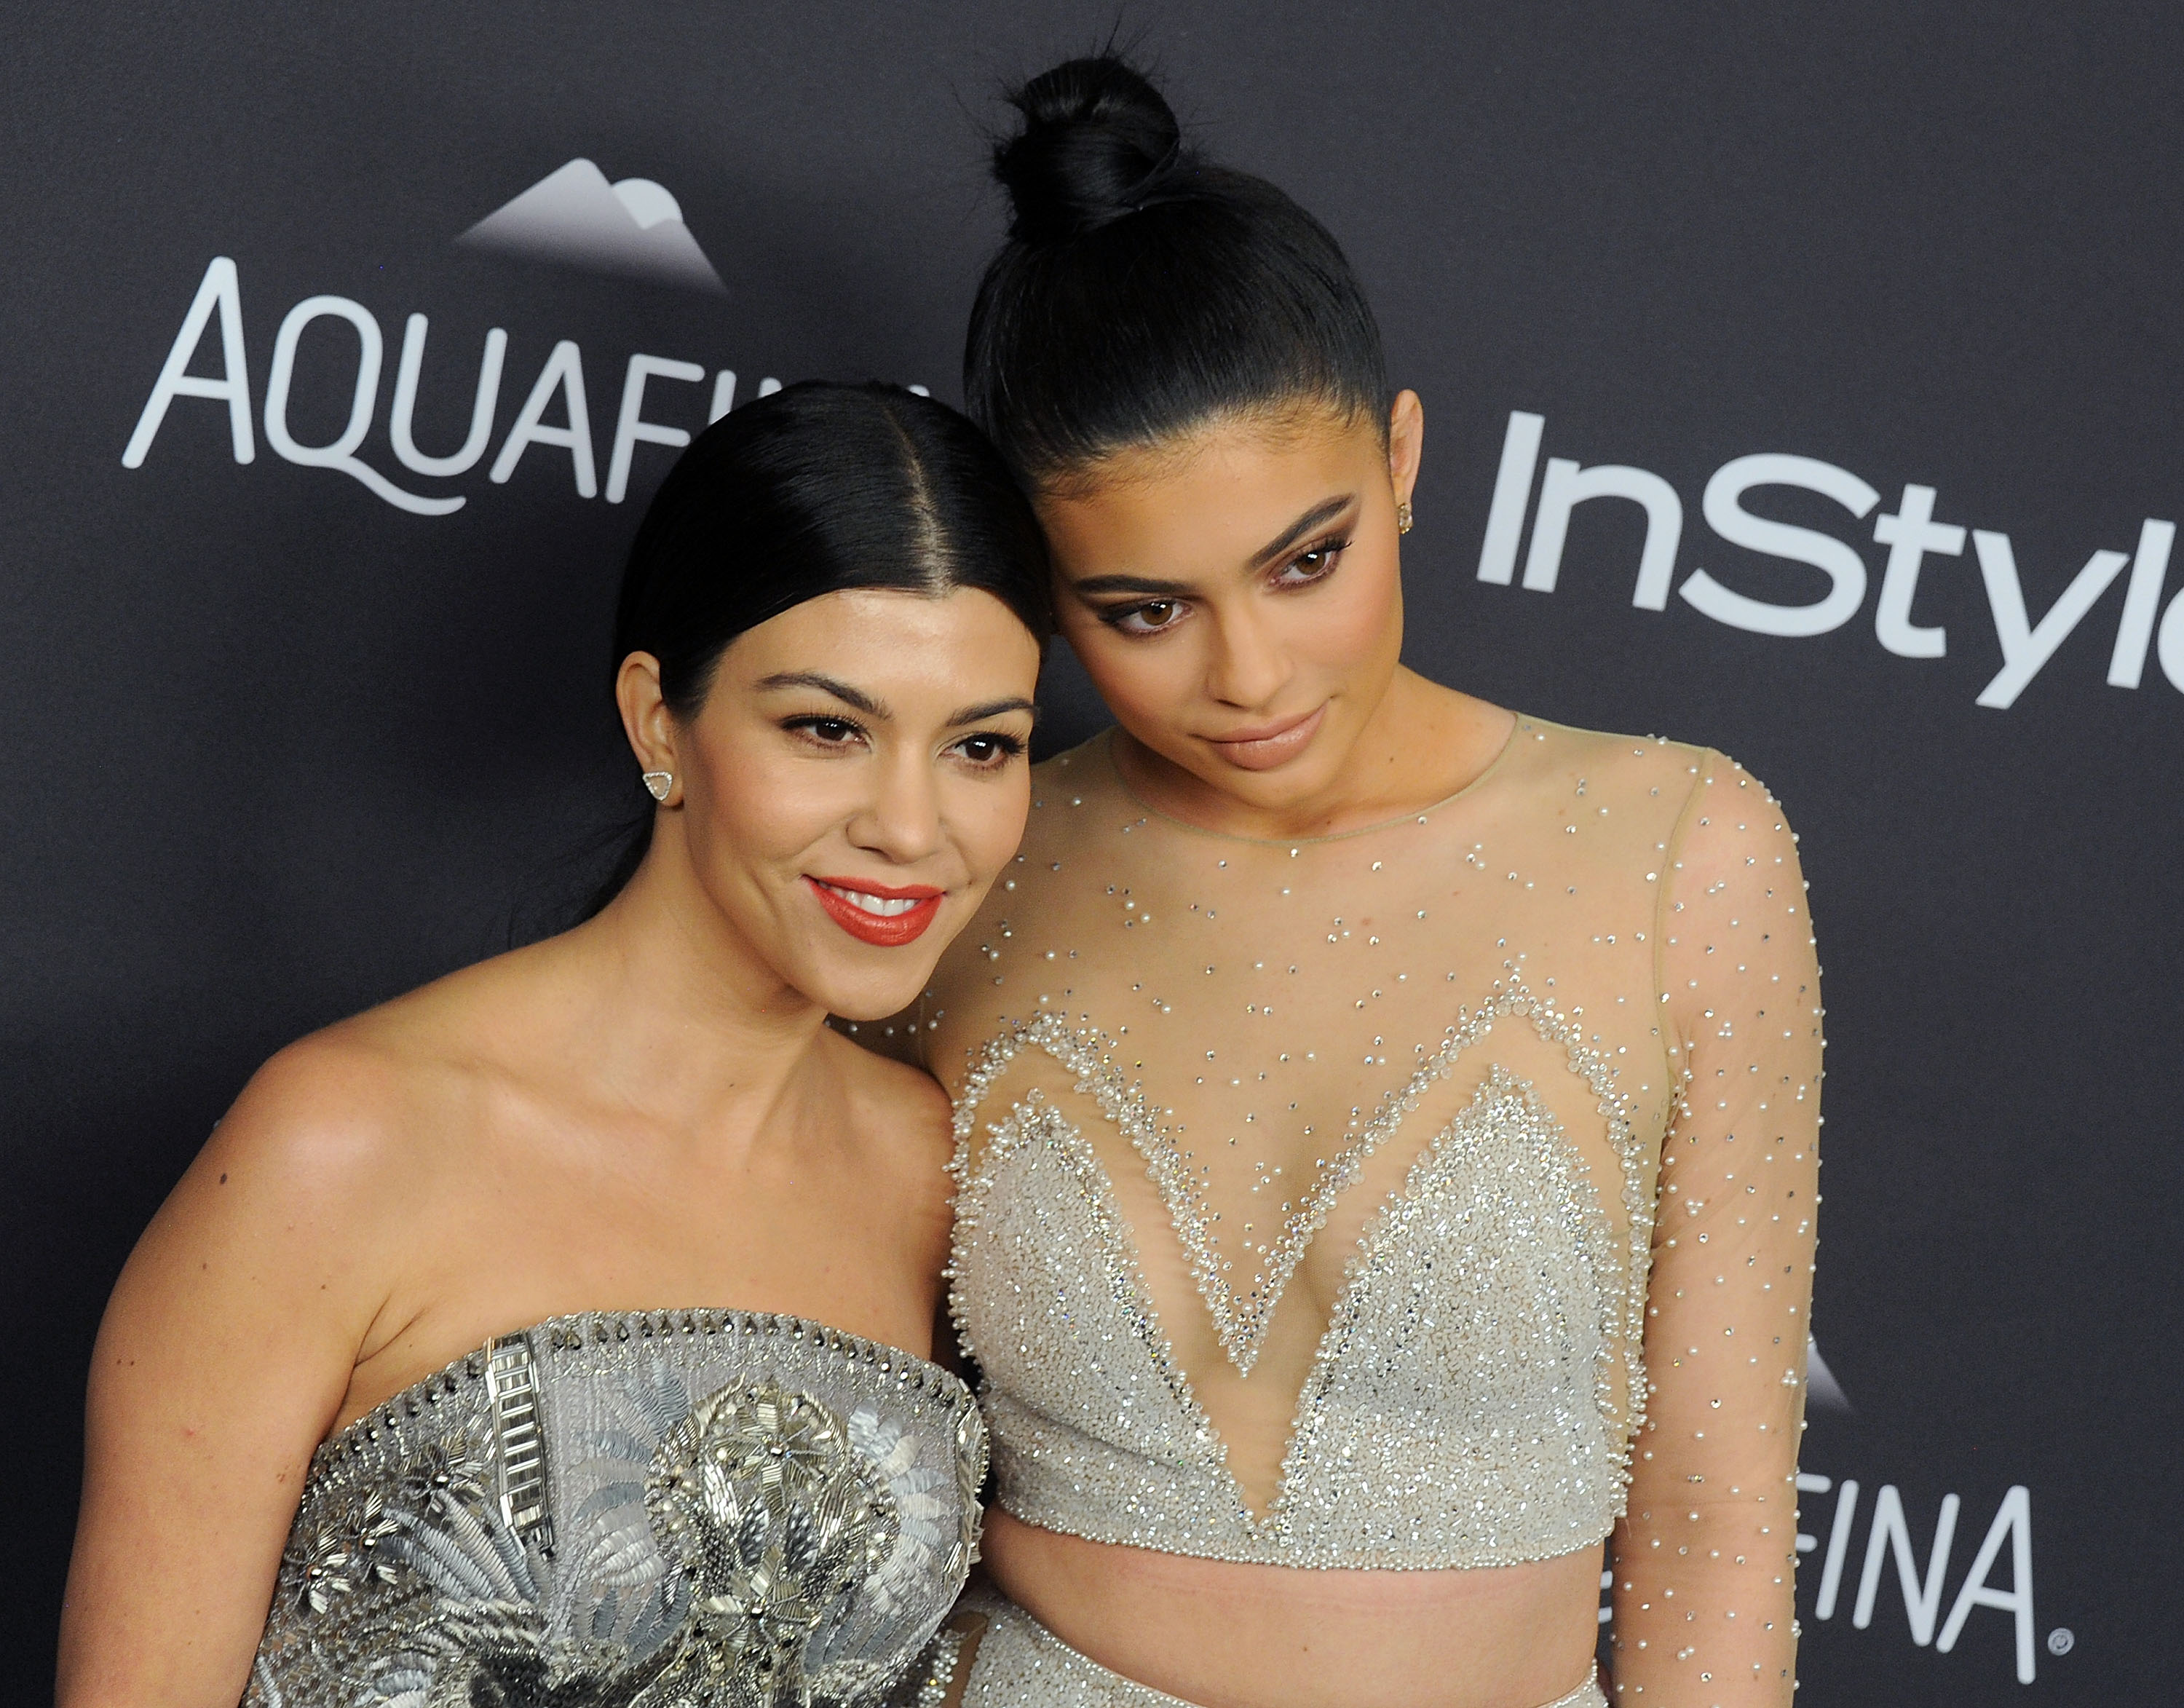 Kourtney Kardashian and Kylie Jenner posing next to each other in front of a black backdrop